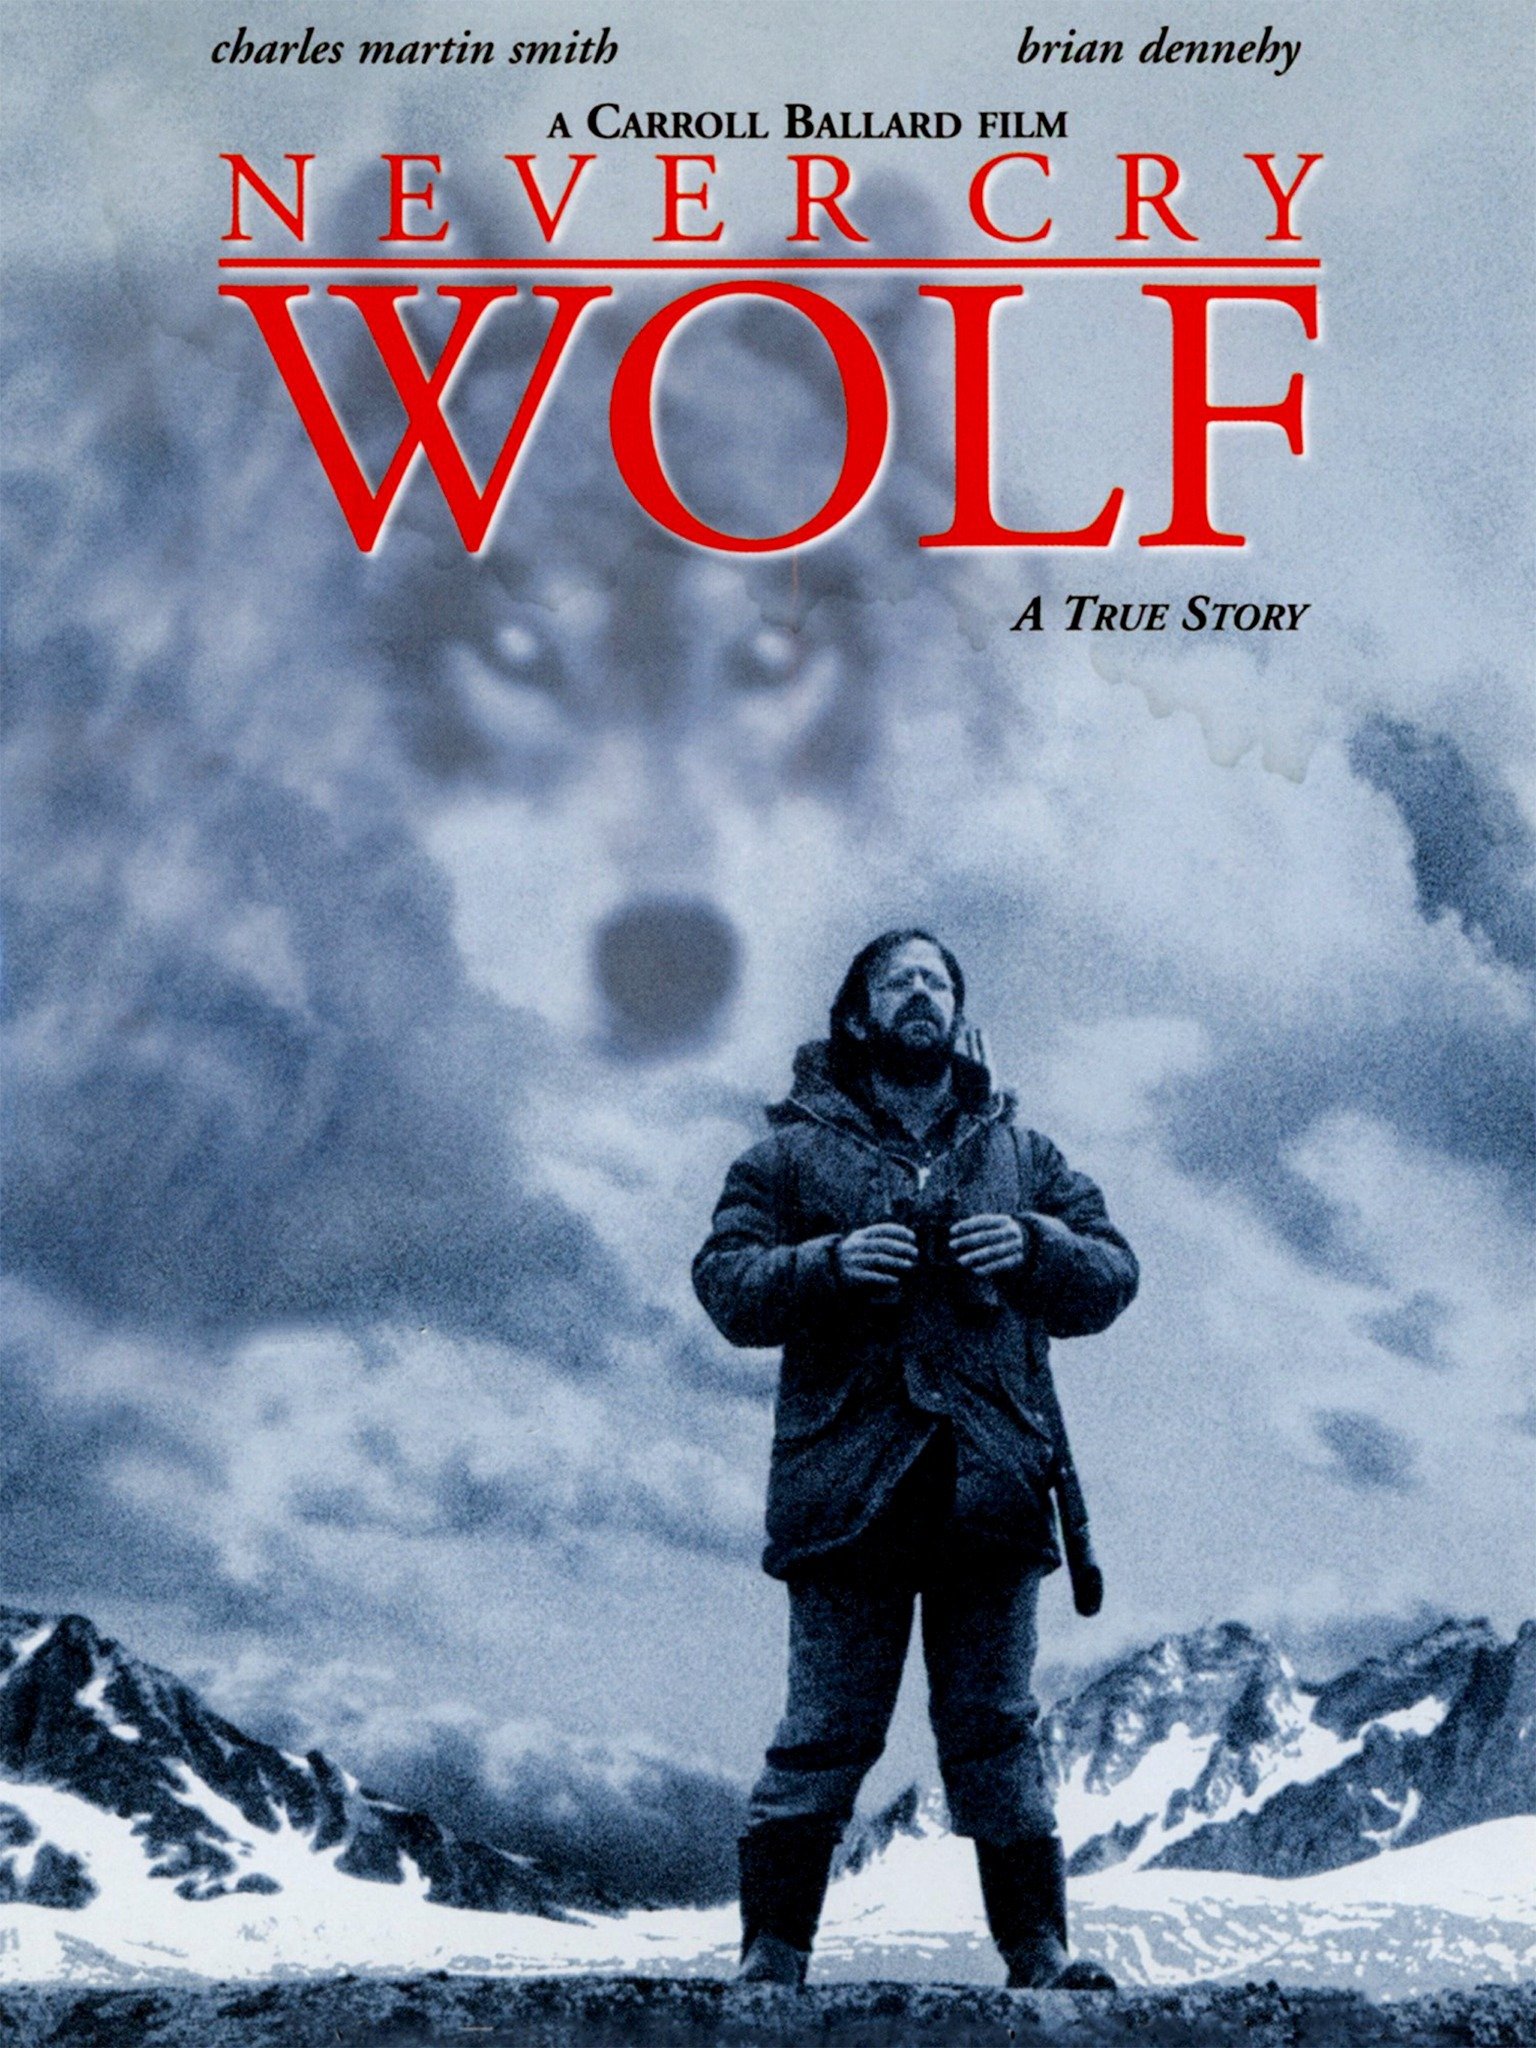 Never Cry Wolf - Rotten Tomatoes